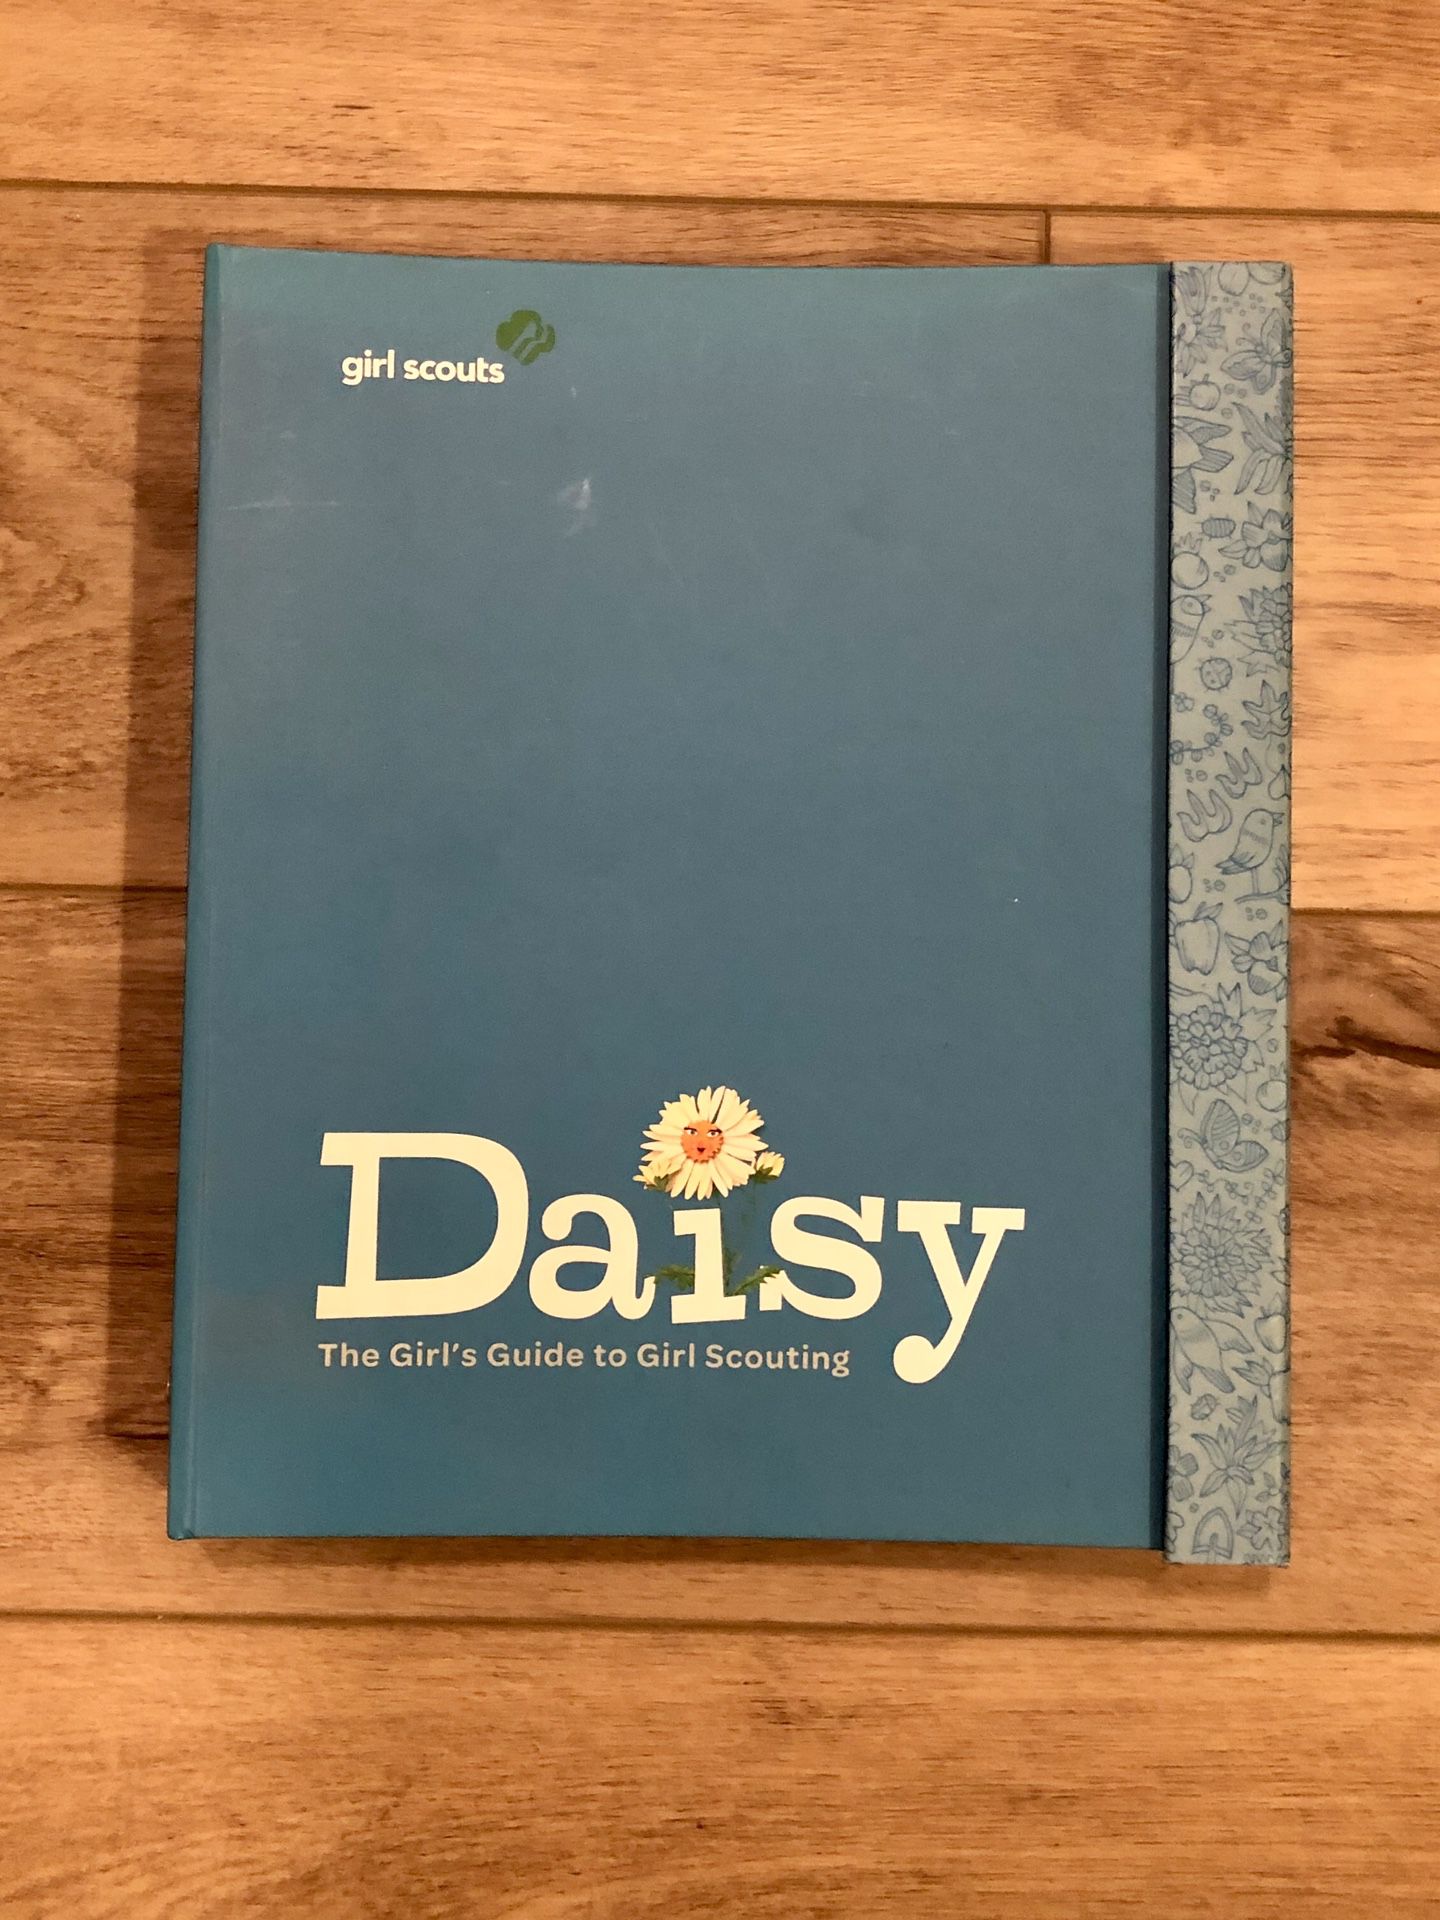 Daisy Girl Scout Guide, Patches & Shirt